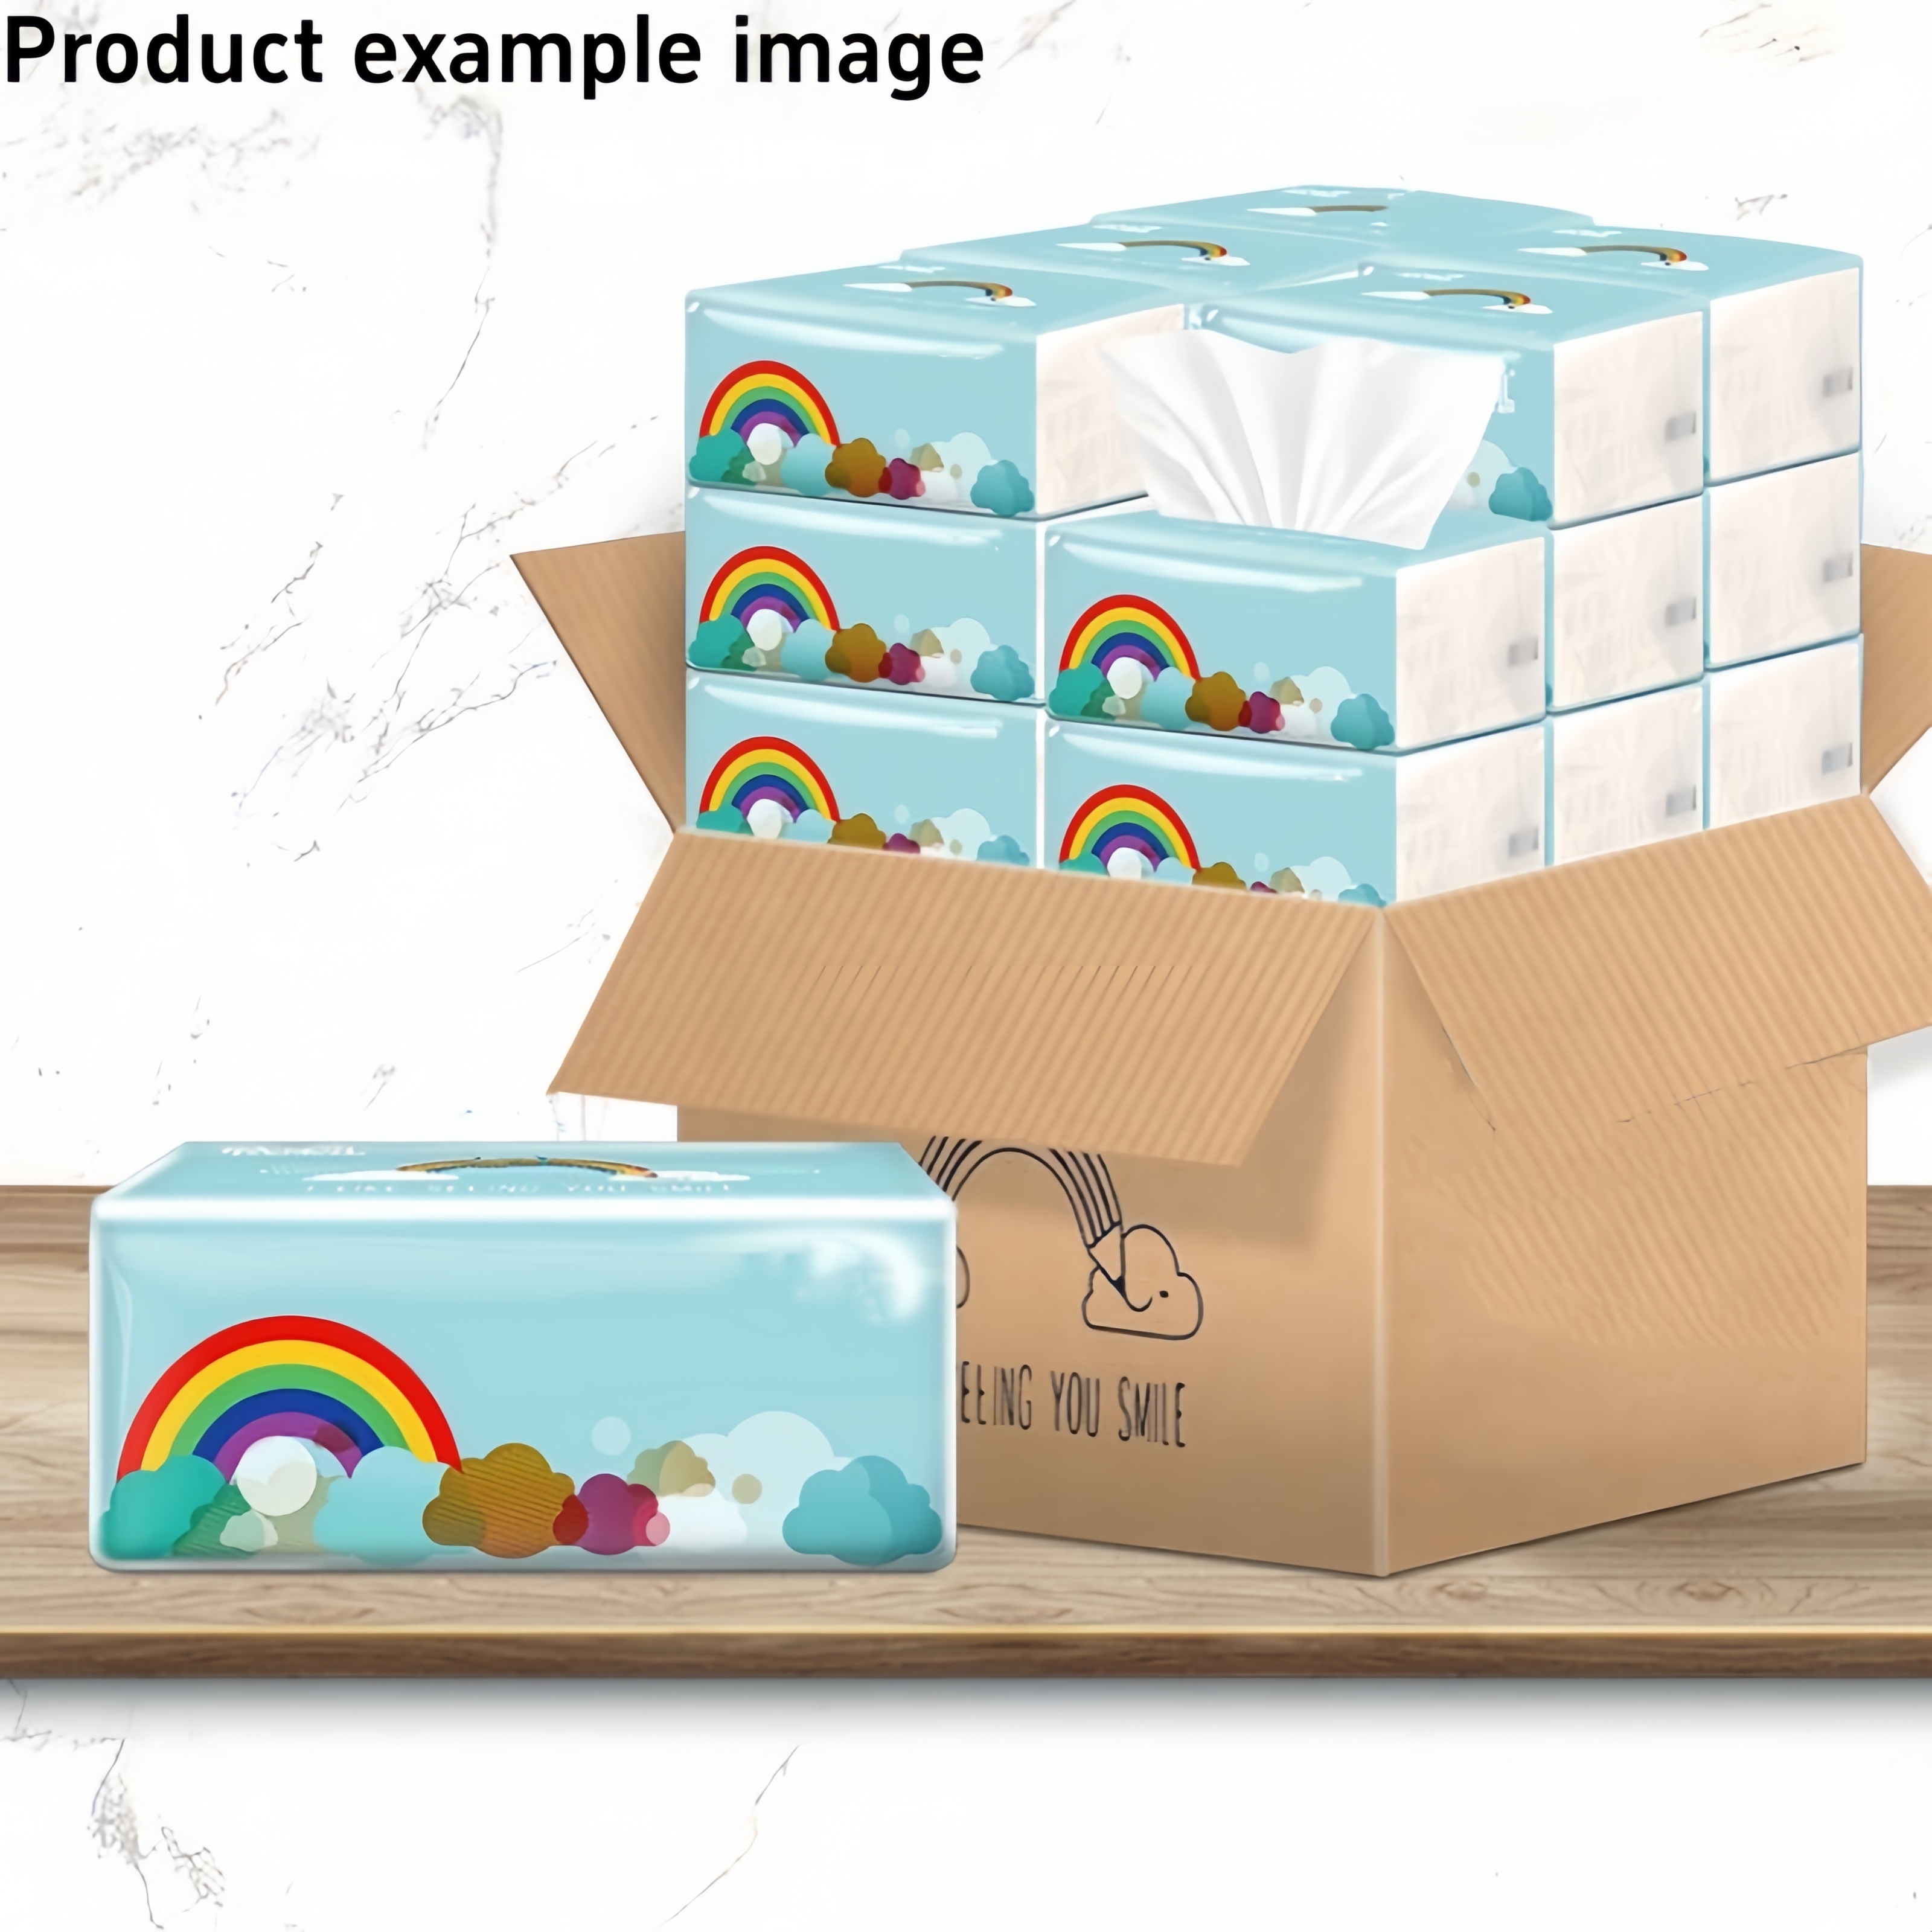 

12 Pack Ultra Soft 4-ply Facial Tissues - Virgin Wood Pulp, High Absorbency, No Fluorescent Agents, All Skin Types, 304 Sheets, 76 Draws - Ideal For Home, Commercial, Camping, Rv Use